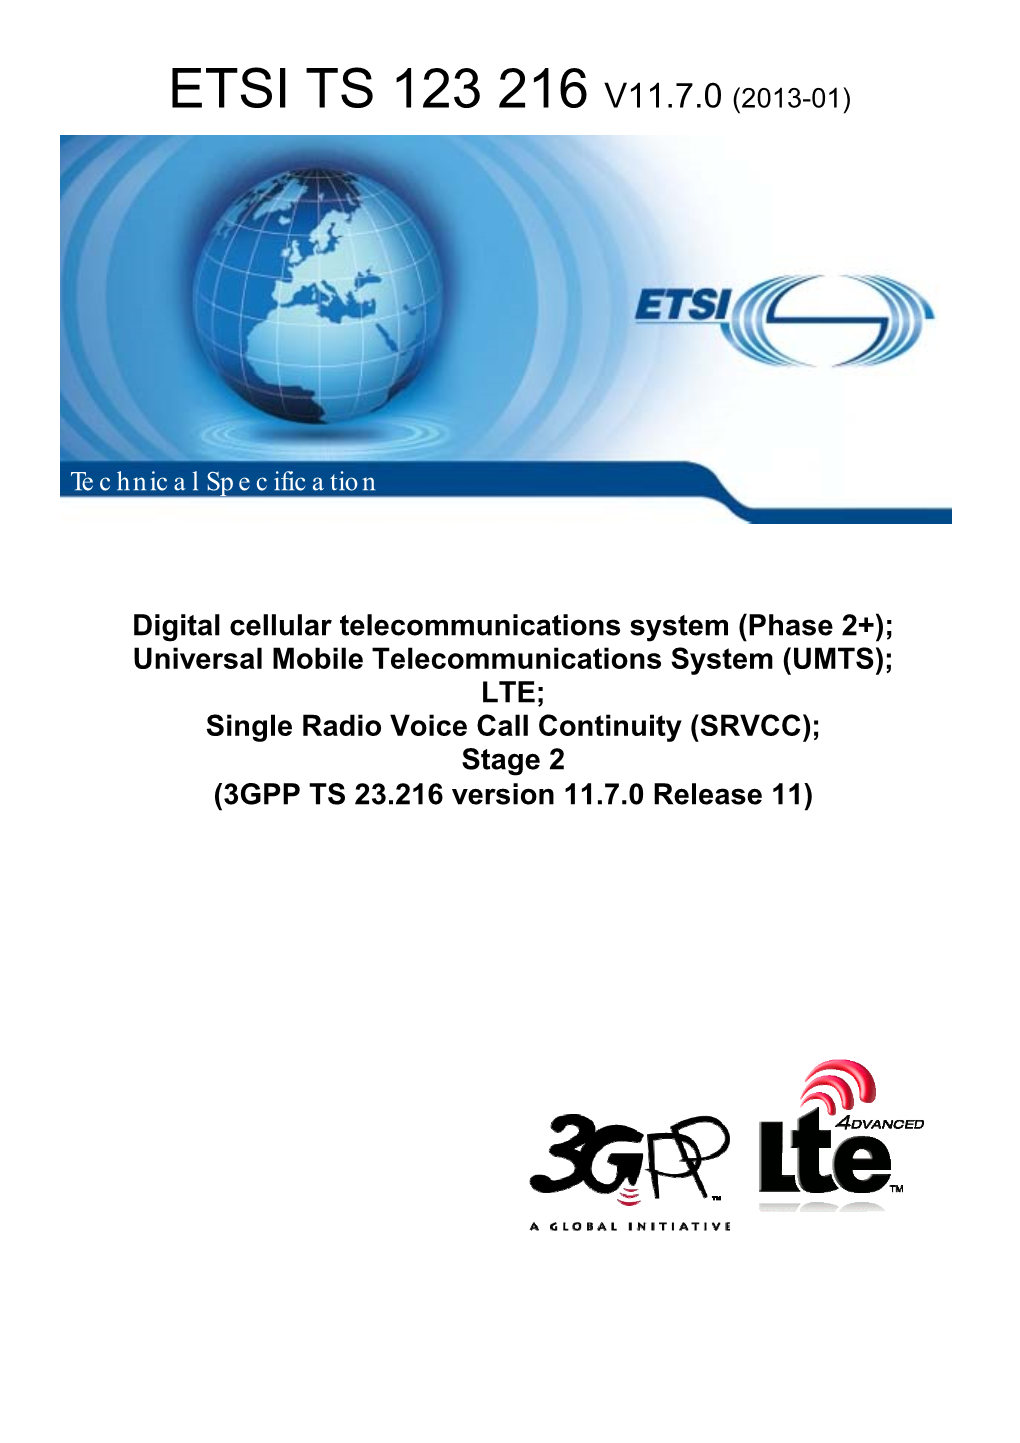 UMTS); LTE; Single Radio Voice Call Continuity (SRVCC); Stage 2 (3GPP TS 23.216 Version 11.7.0 Release 11)